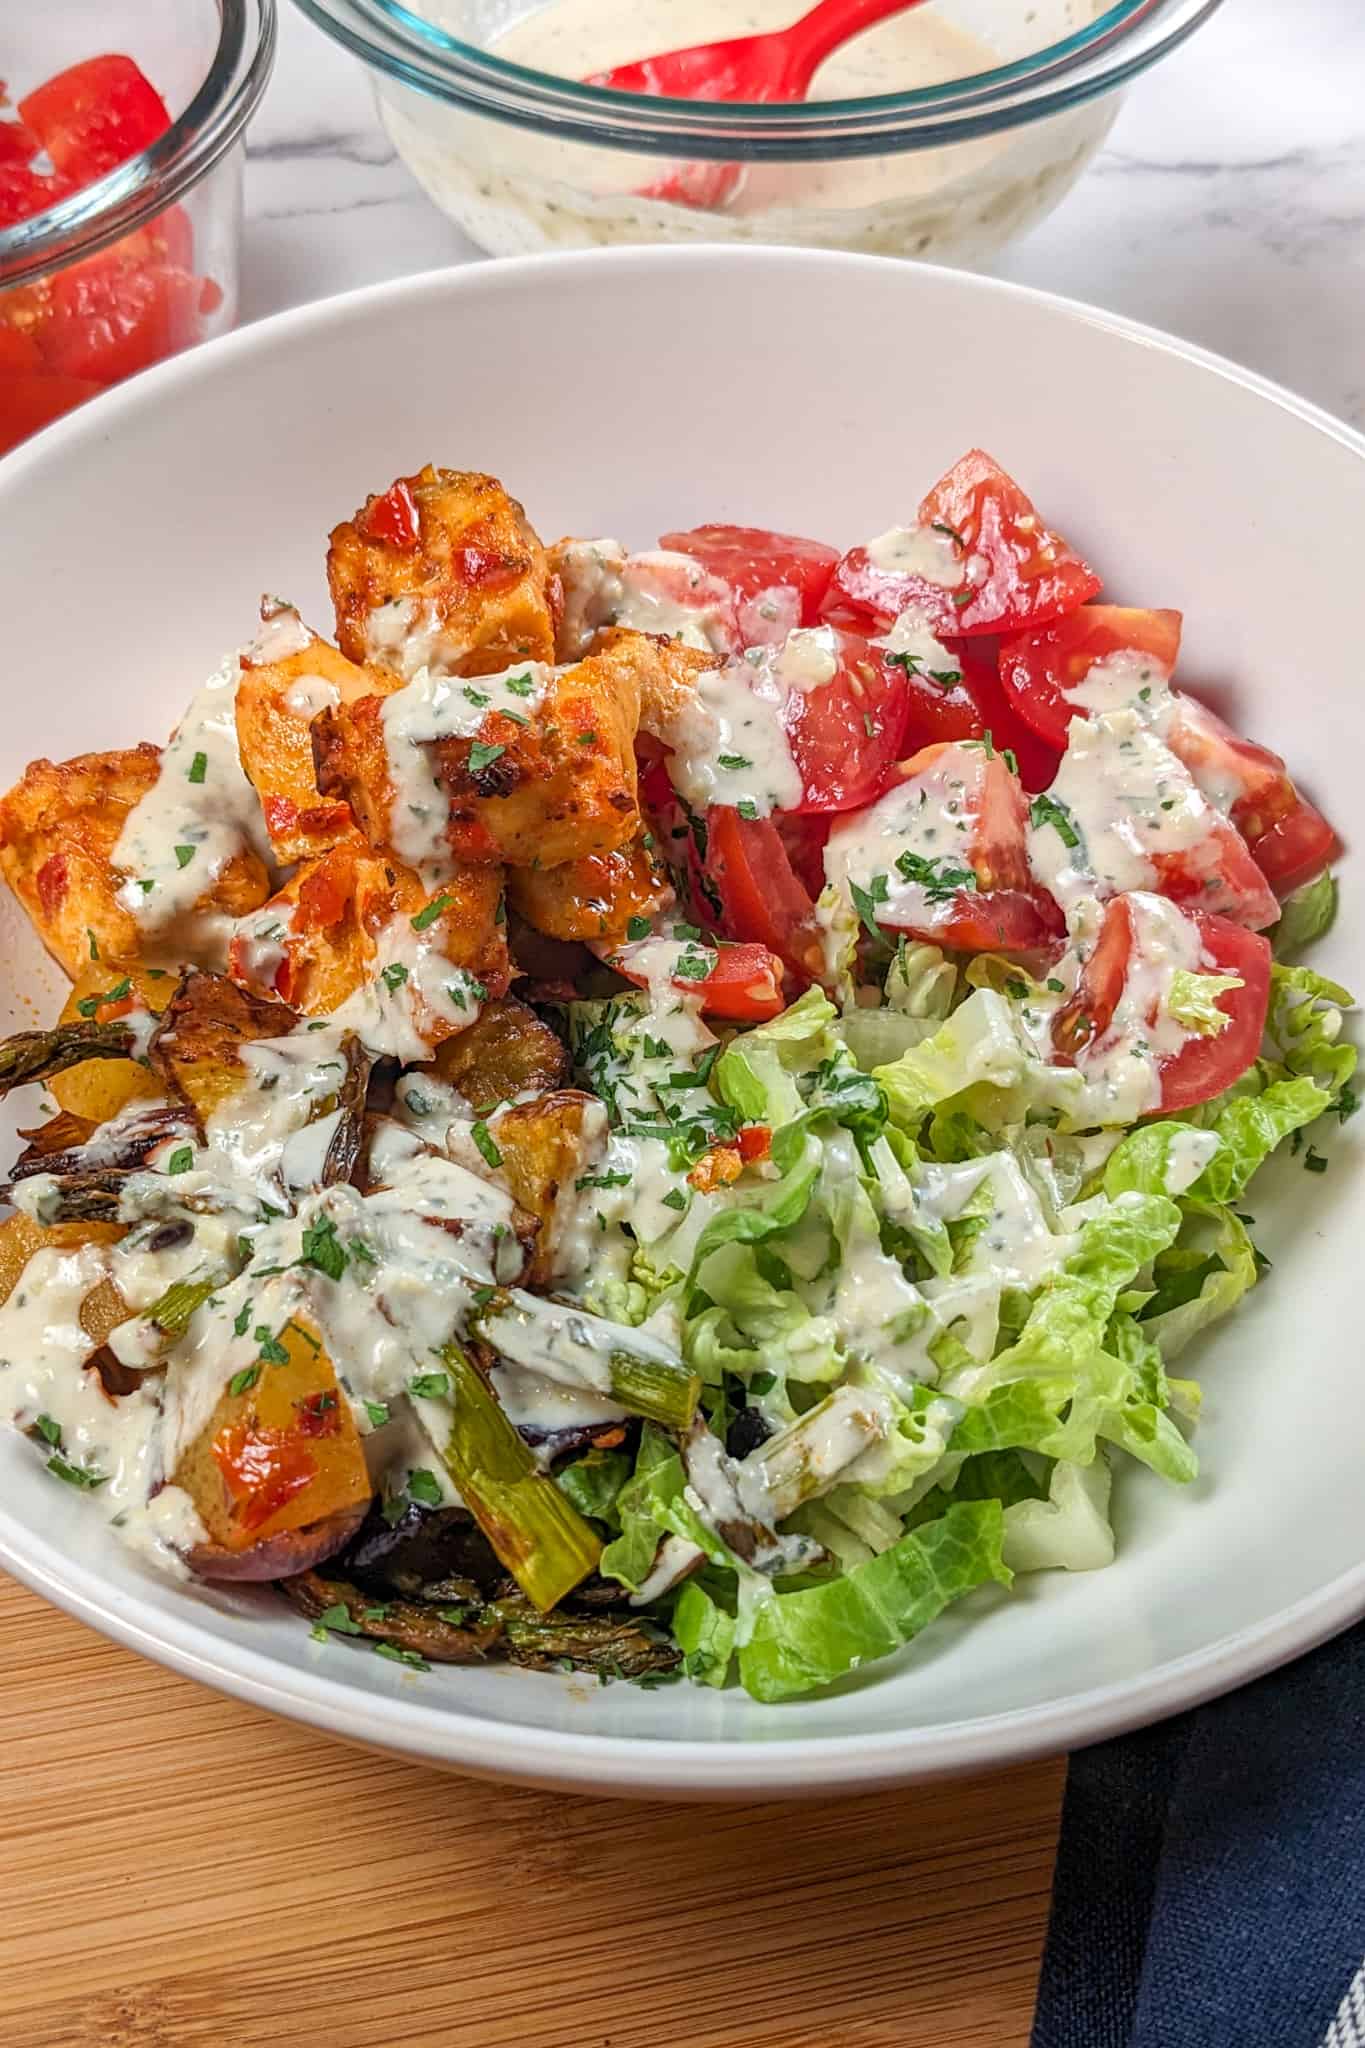 top view of the Air Fryer Calabrian Chili Salmon and Vegetables Bowl in a wide rim bowl, a dish where the cubed baked salmon, quartered campari tomatoes, shredded romaine lettuce and roasted vegetables share equal pie part with the rosemary tahini dressing drizzled in a zig zag on top